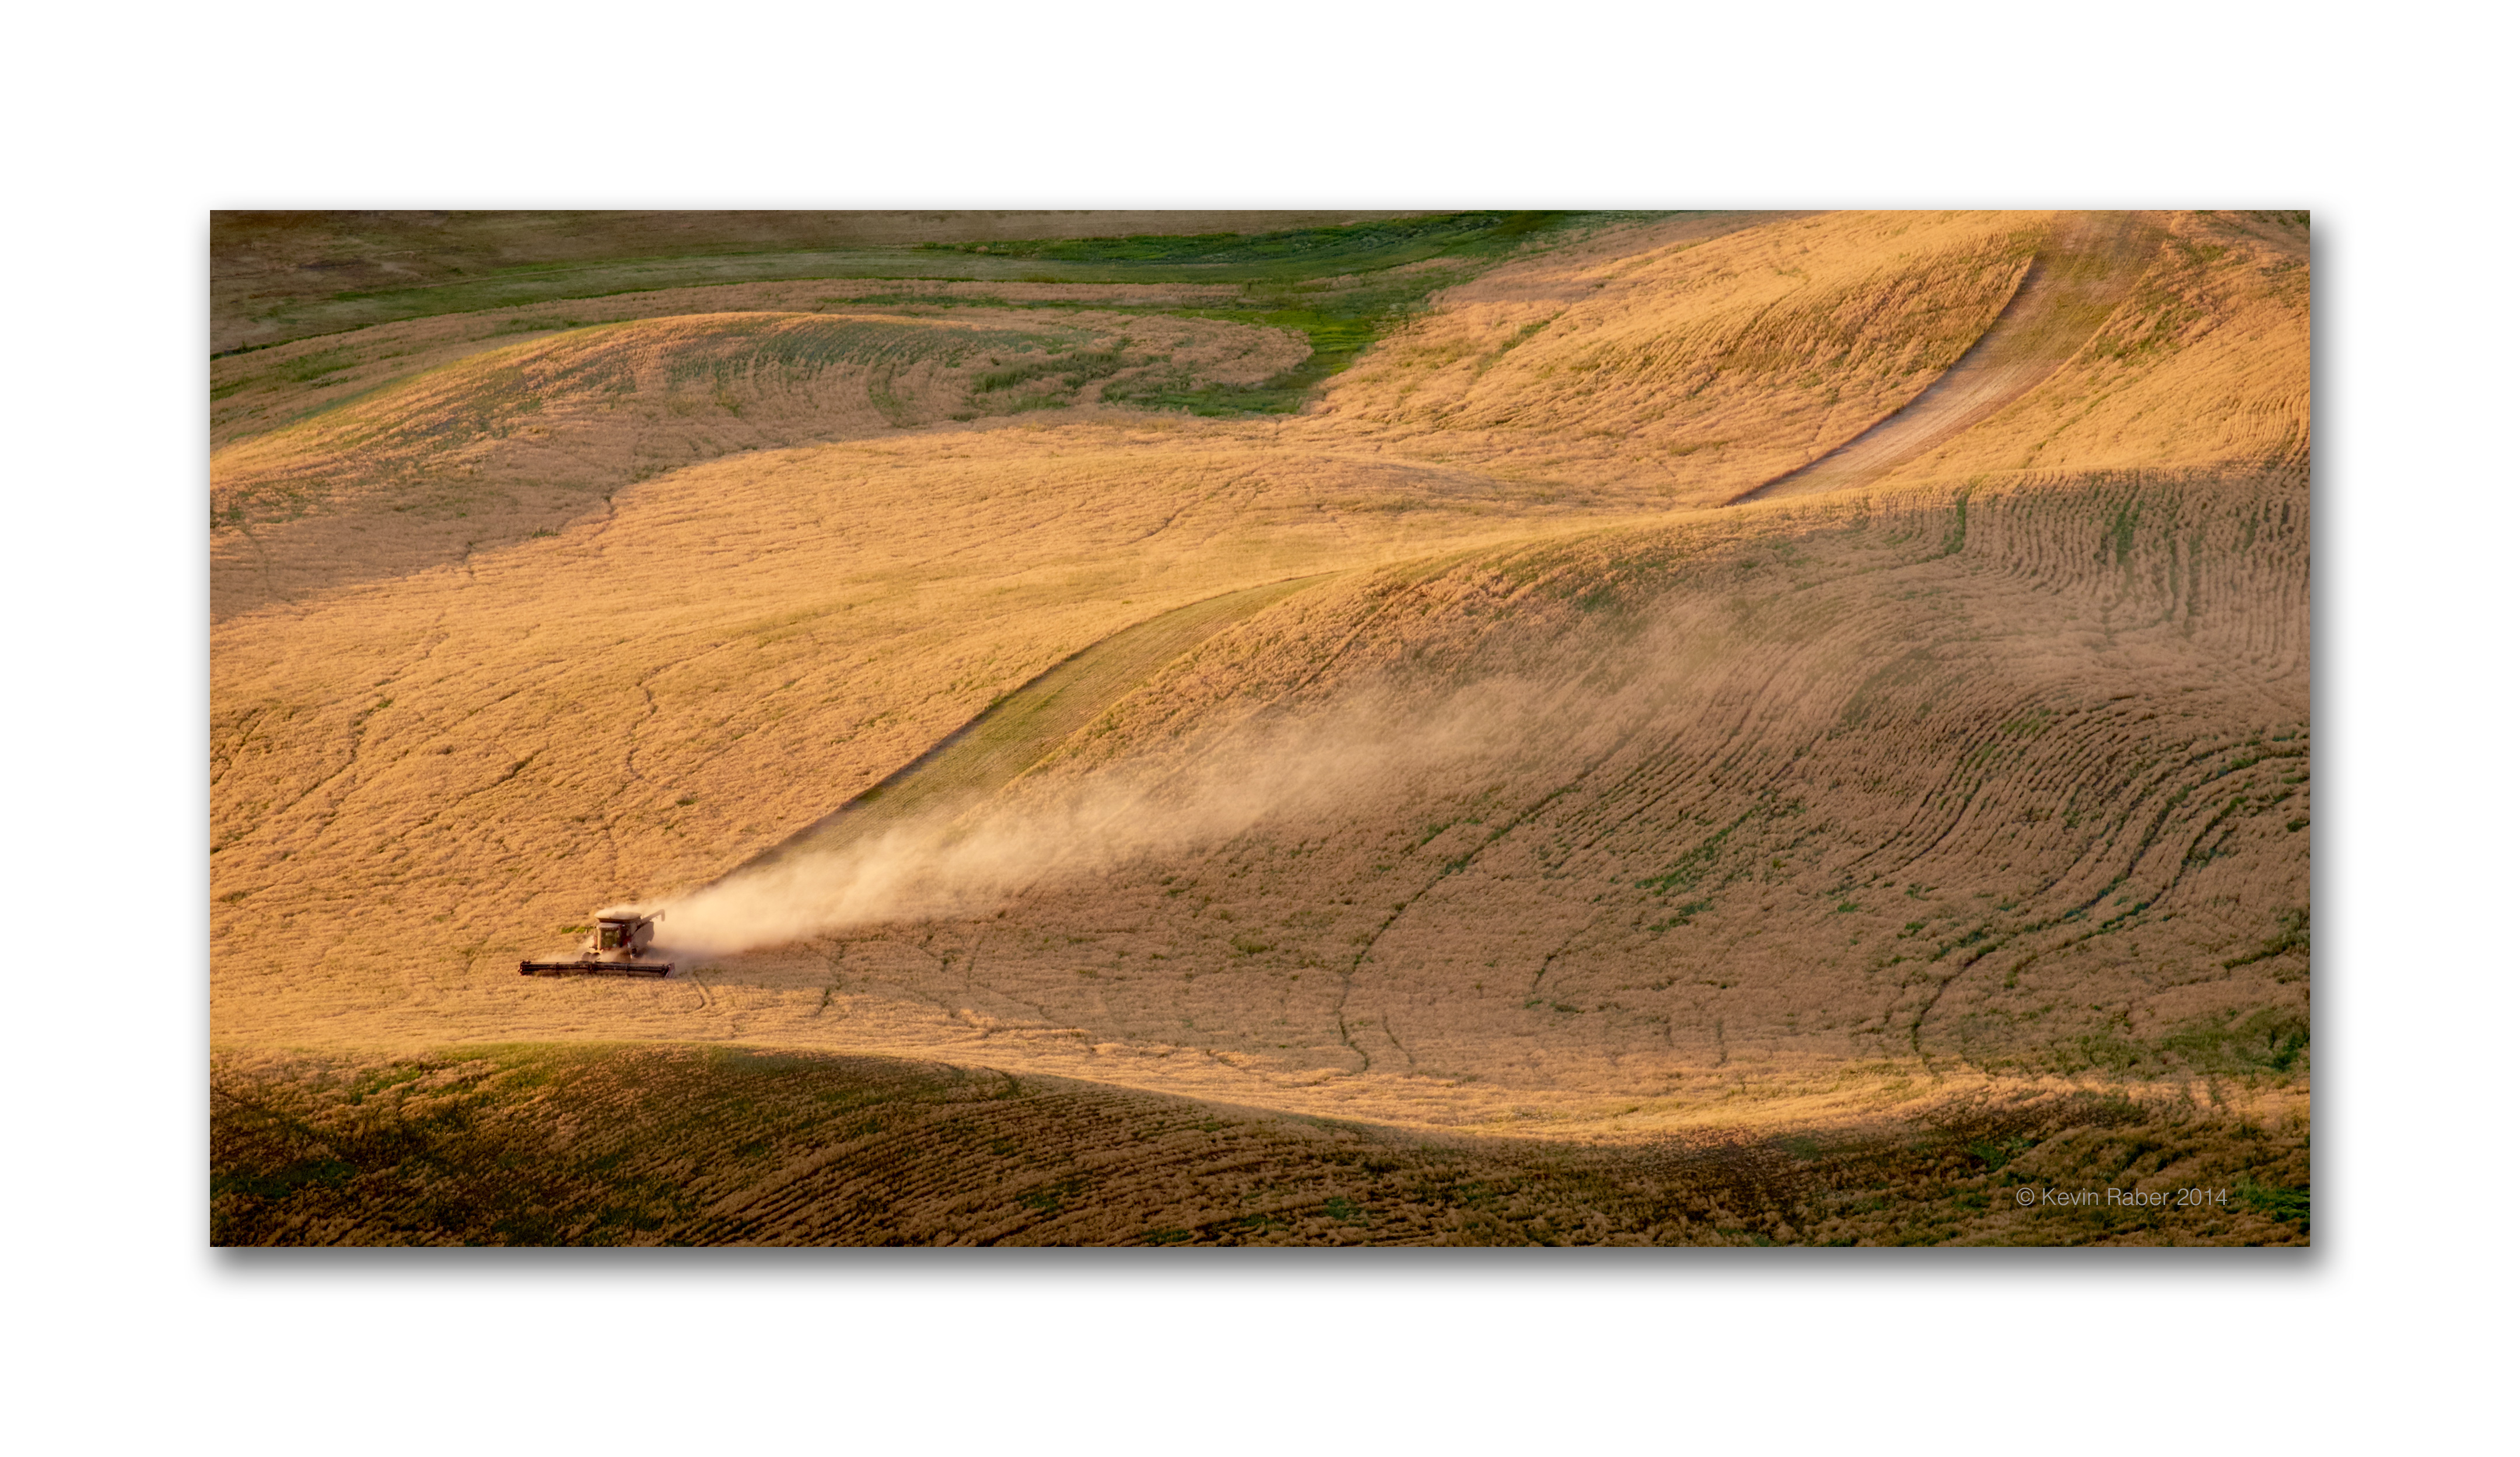 It's A Lonely Job, In The Palouse, Fuji XT-1 55-200mm zoom